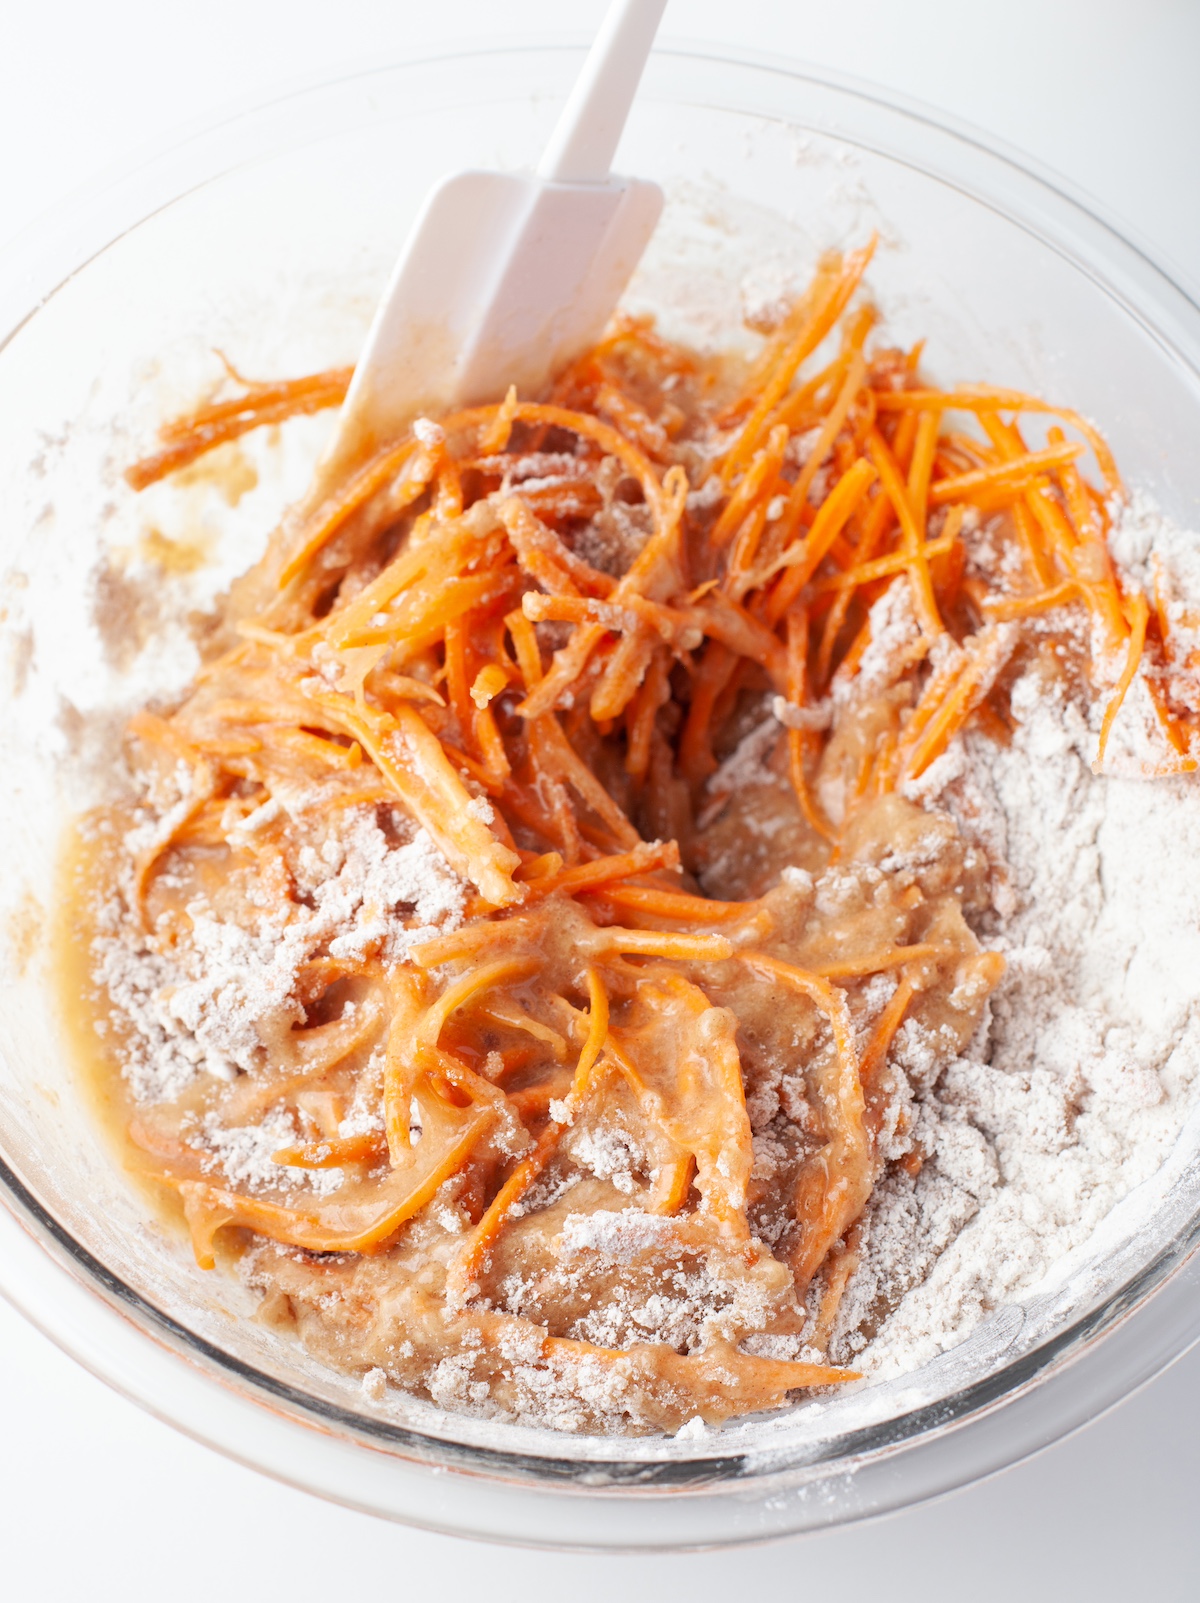 Folding the wet carrot mixture into the dry ingredients